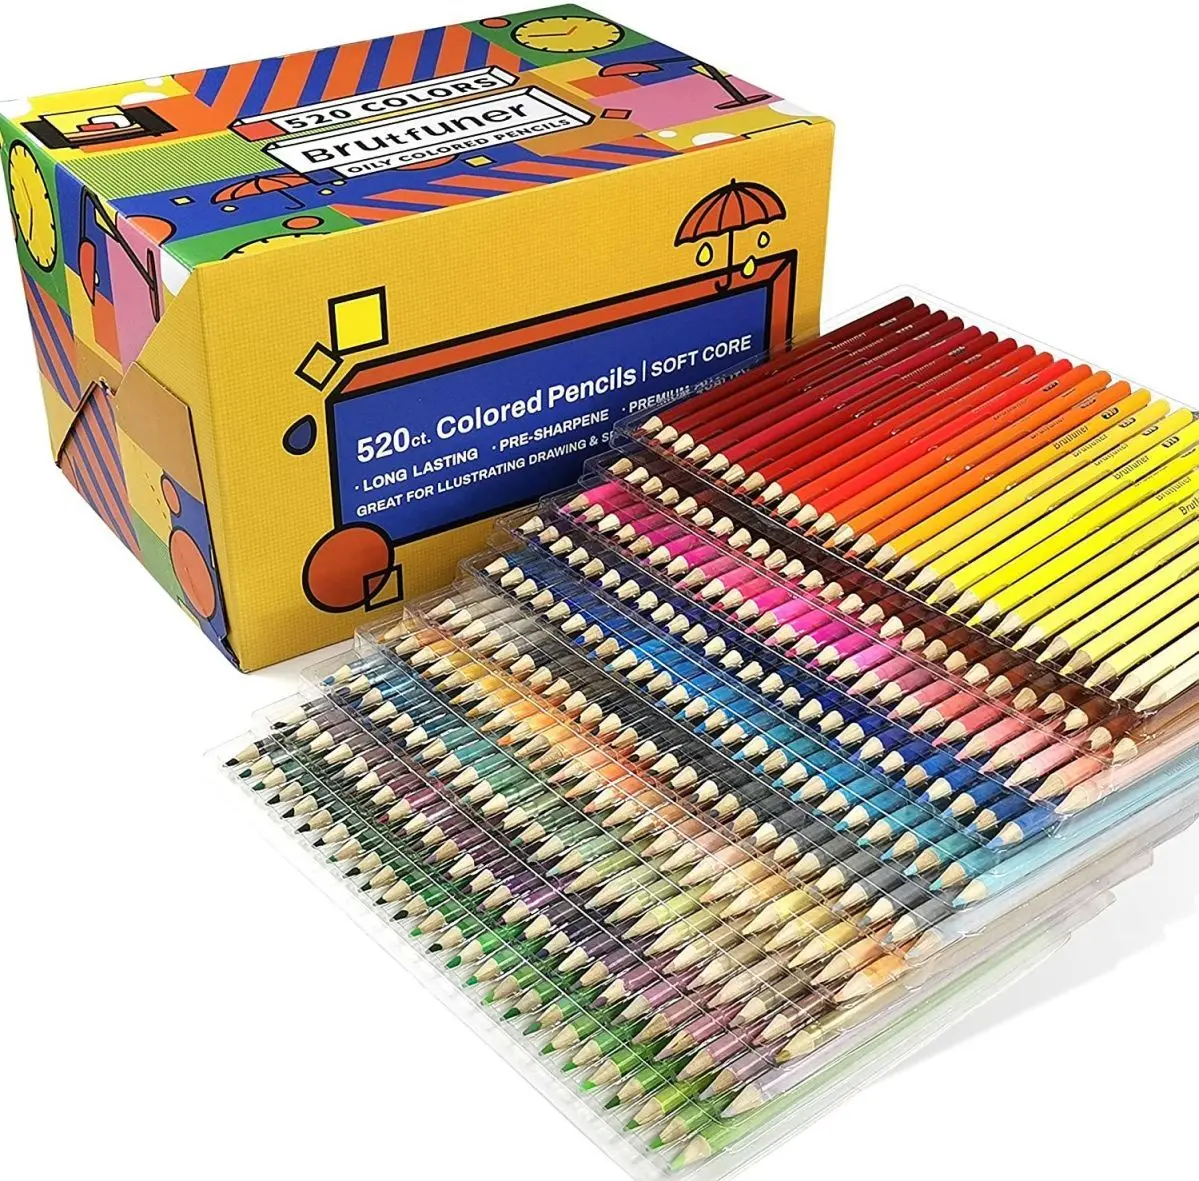 Brutfuner 520pcs Oil Colored Pencils Drawing Pencil Set Soft Sketch Color Pencil Gift Box For Children Painting Art Supplies xysoo 50 70pcs drawing sketch pencil set soft pastel colored pencil kit macaron crayons for painter sketching gift art supplies